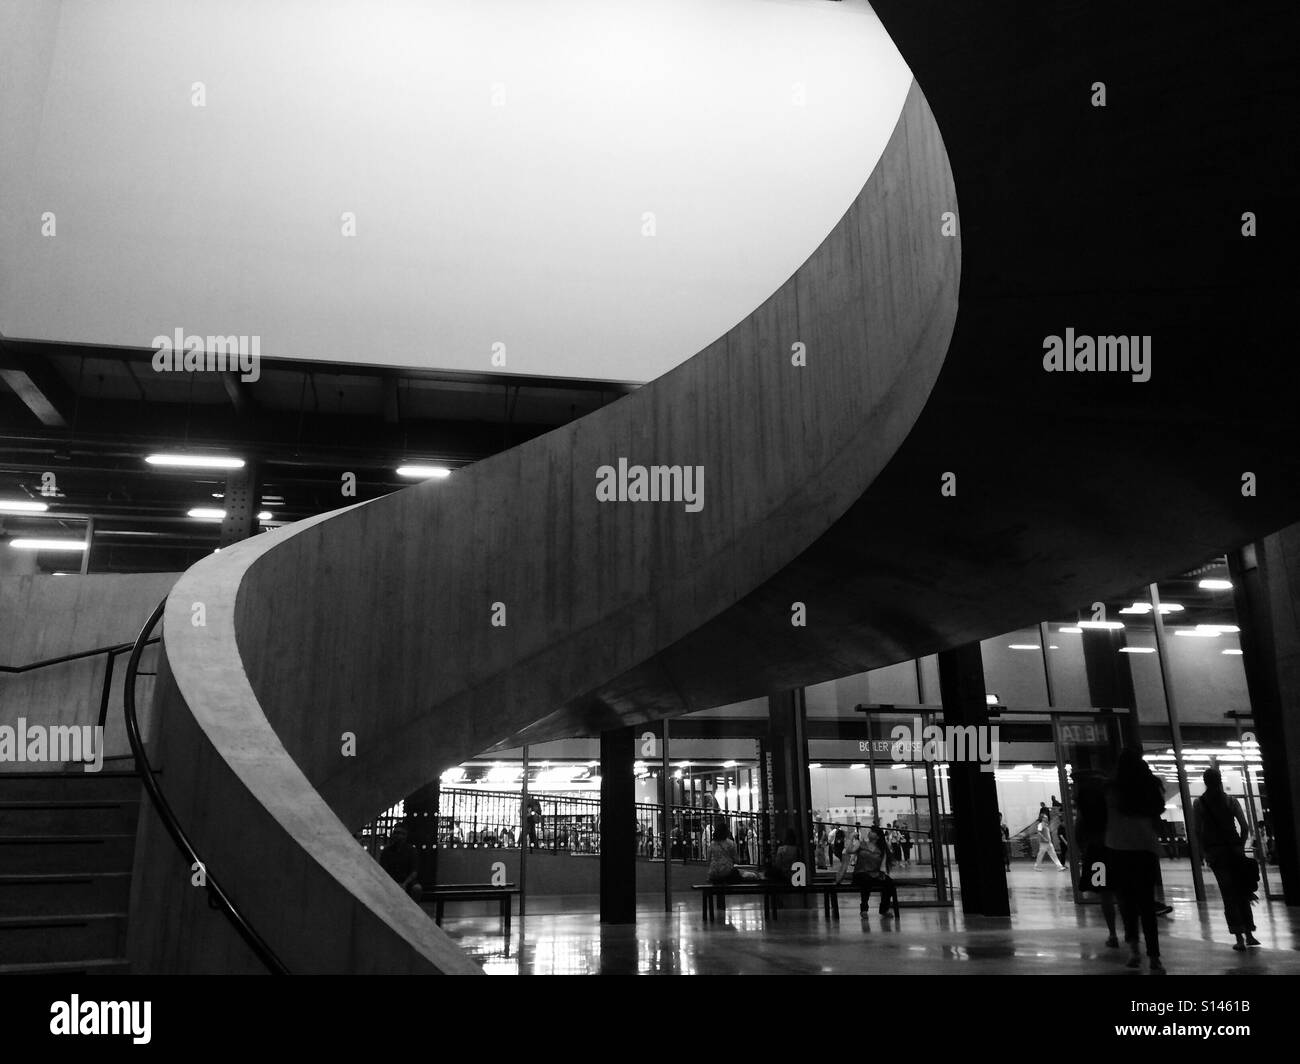 A sweeping concrete staircase creates beautiful lines and leads up to the new extension of the Tate Modern art gallery, Southbank, London. Stock Photo